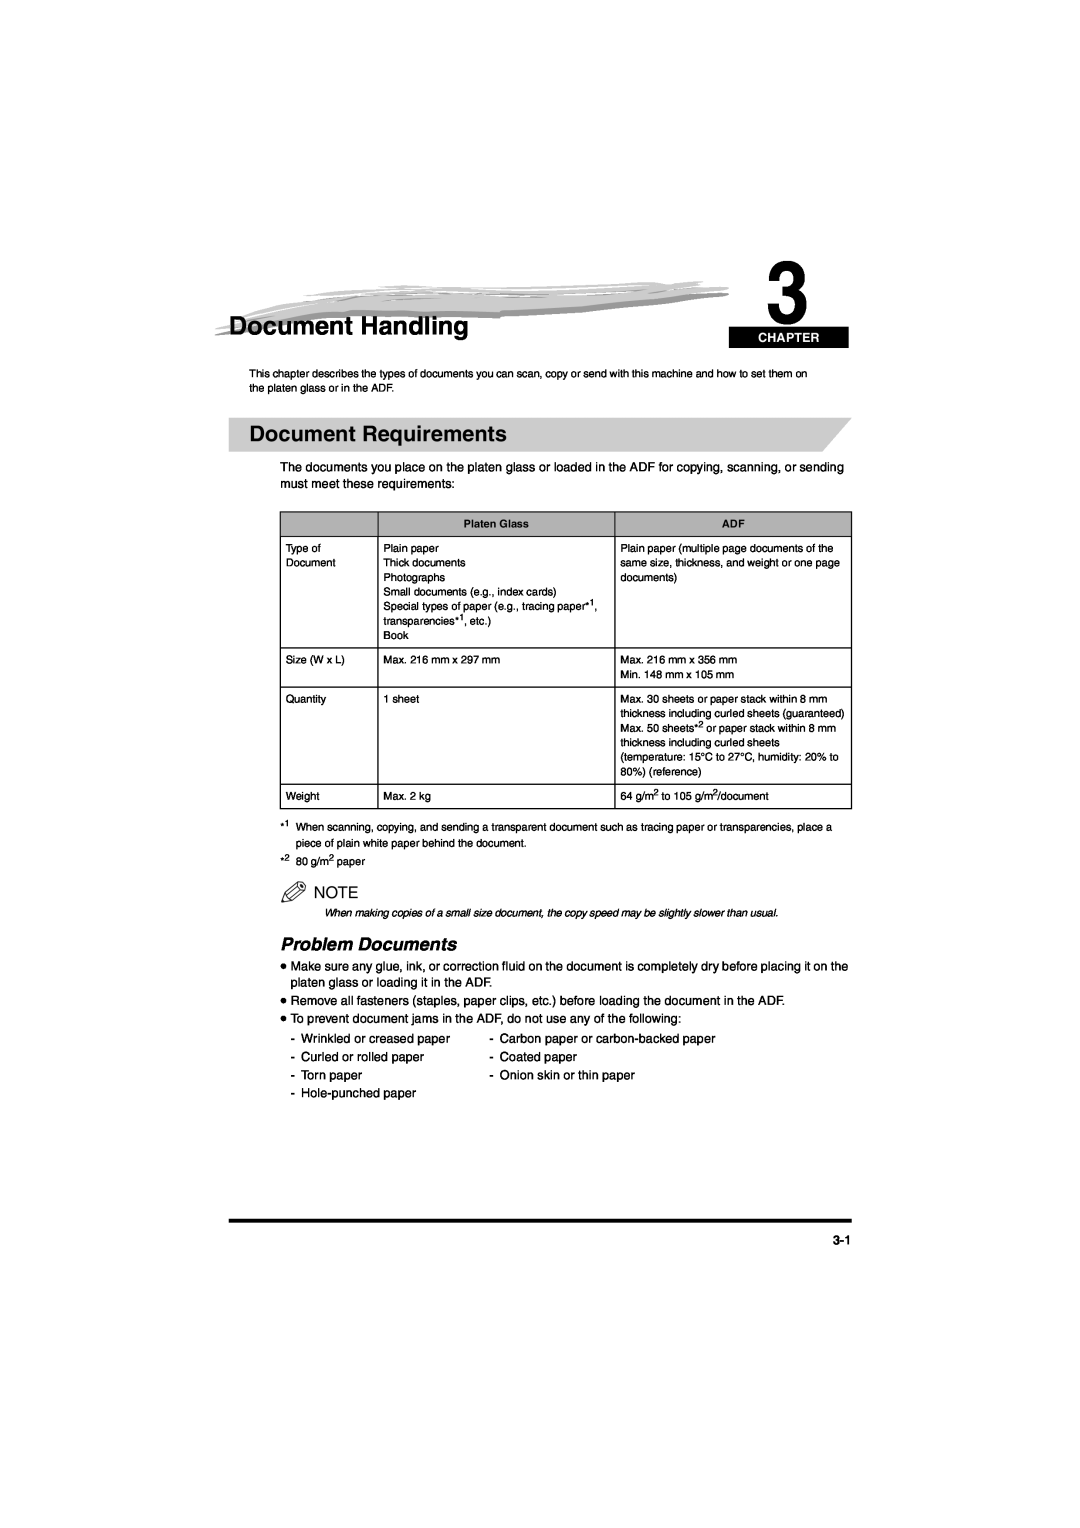 Canon MF5650 manual Document Handling, Document Requirements, Problem Documents, Chapter 